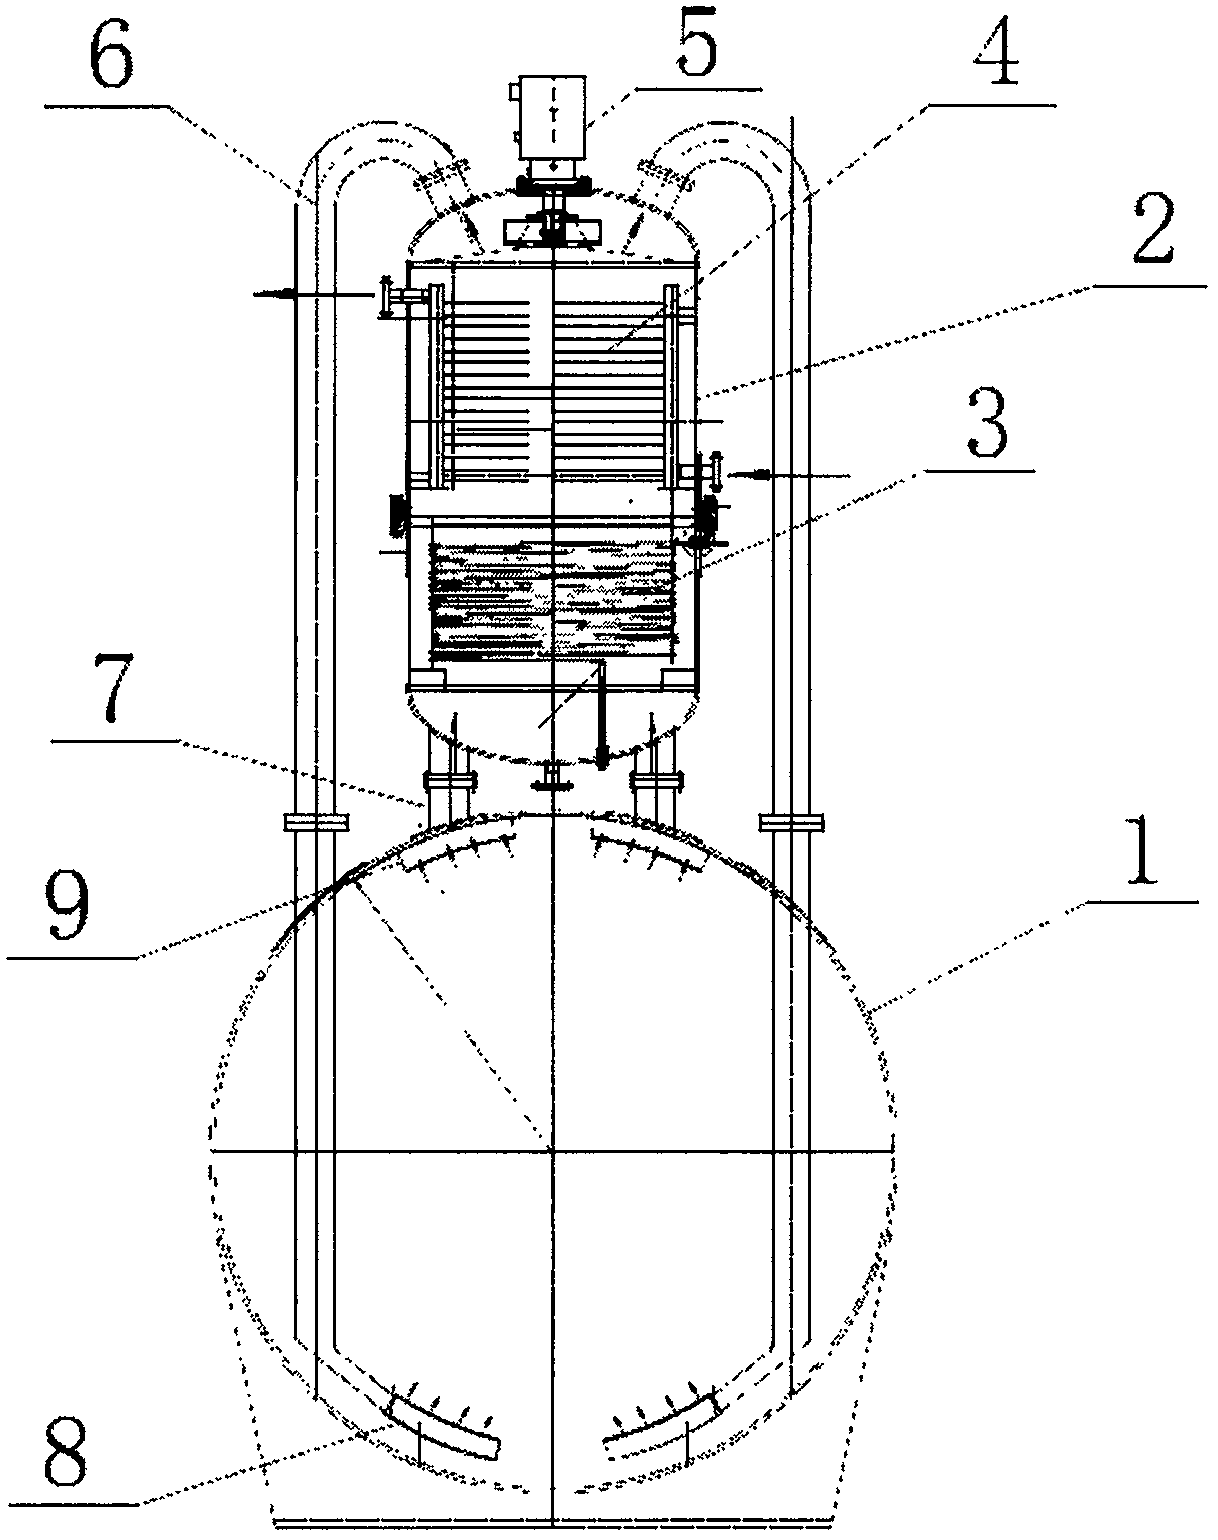 Longitudinal-circulation autoclave provided with external thermal-cold cycling device